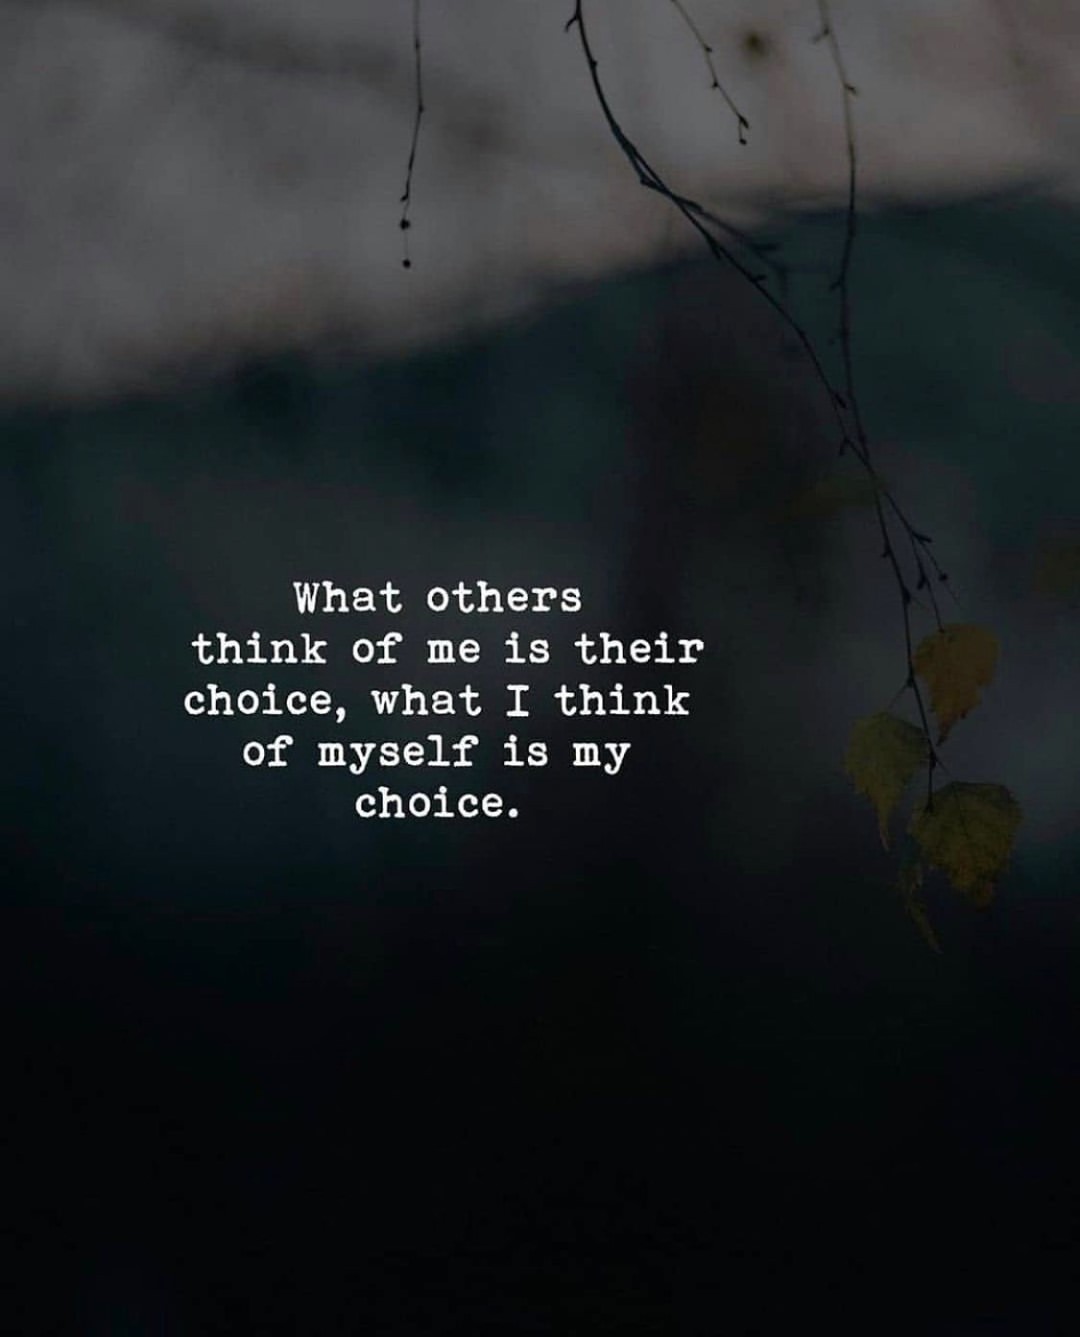 What others think of me is their choice, what I think of myself is my choice.